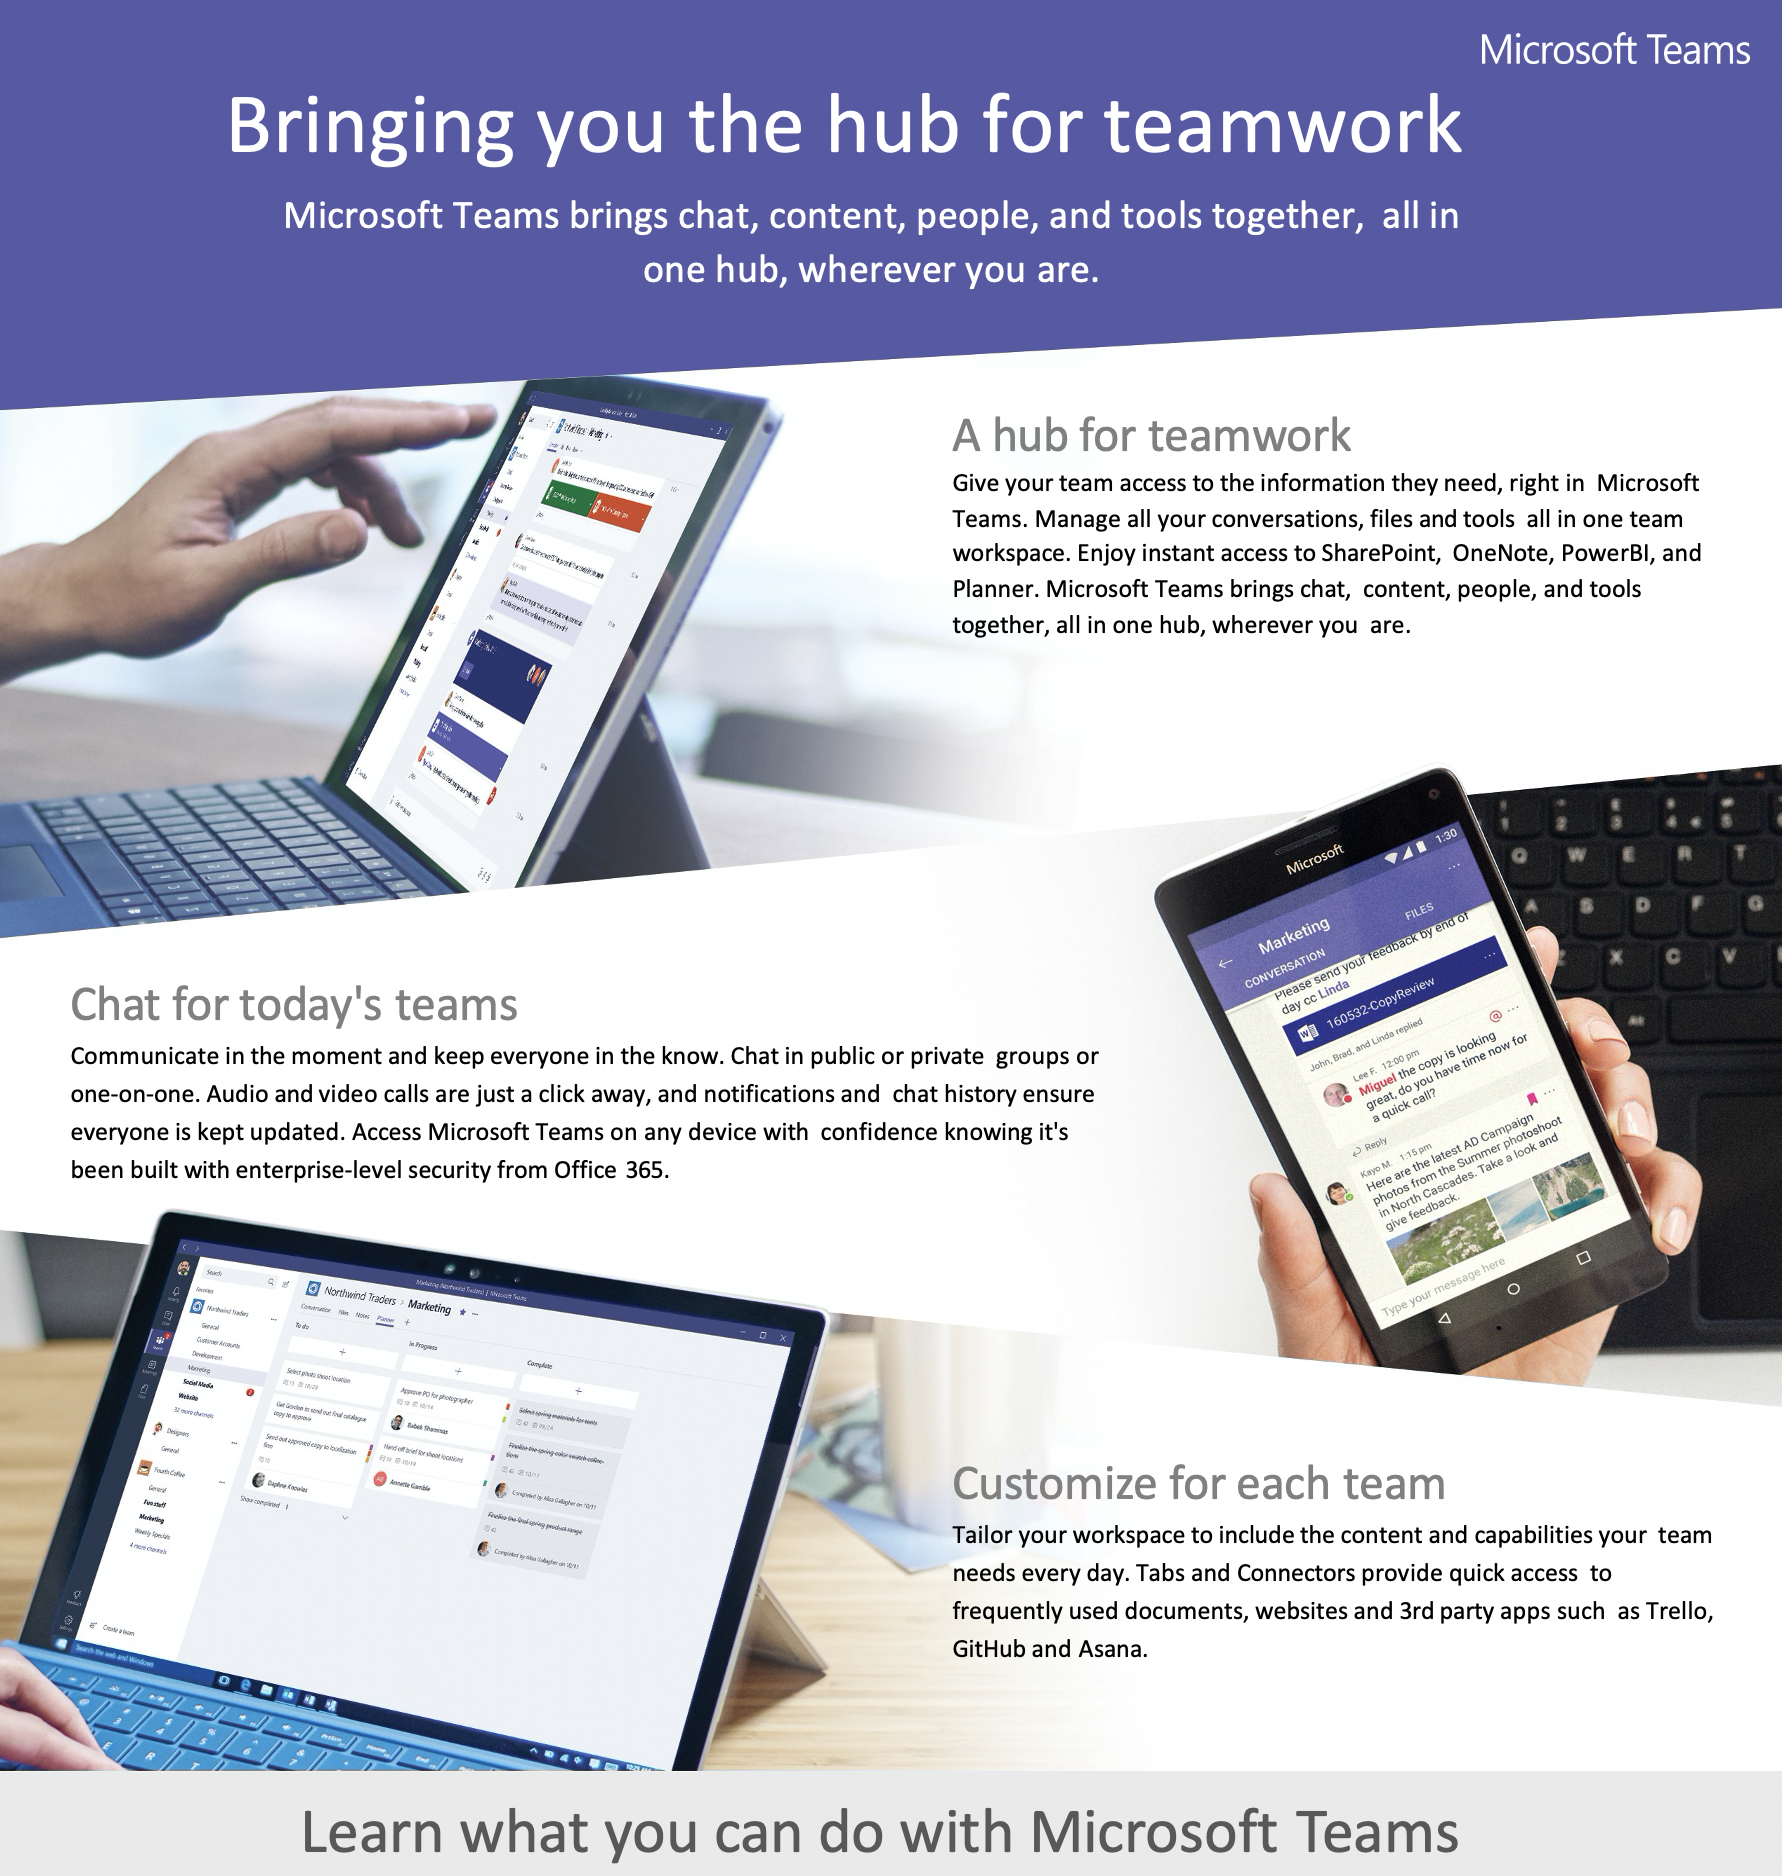 Learn what you can do with microsoft teams_fairdinkum IT consulting